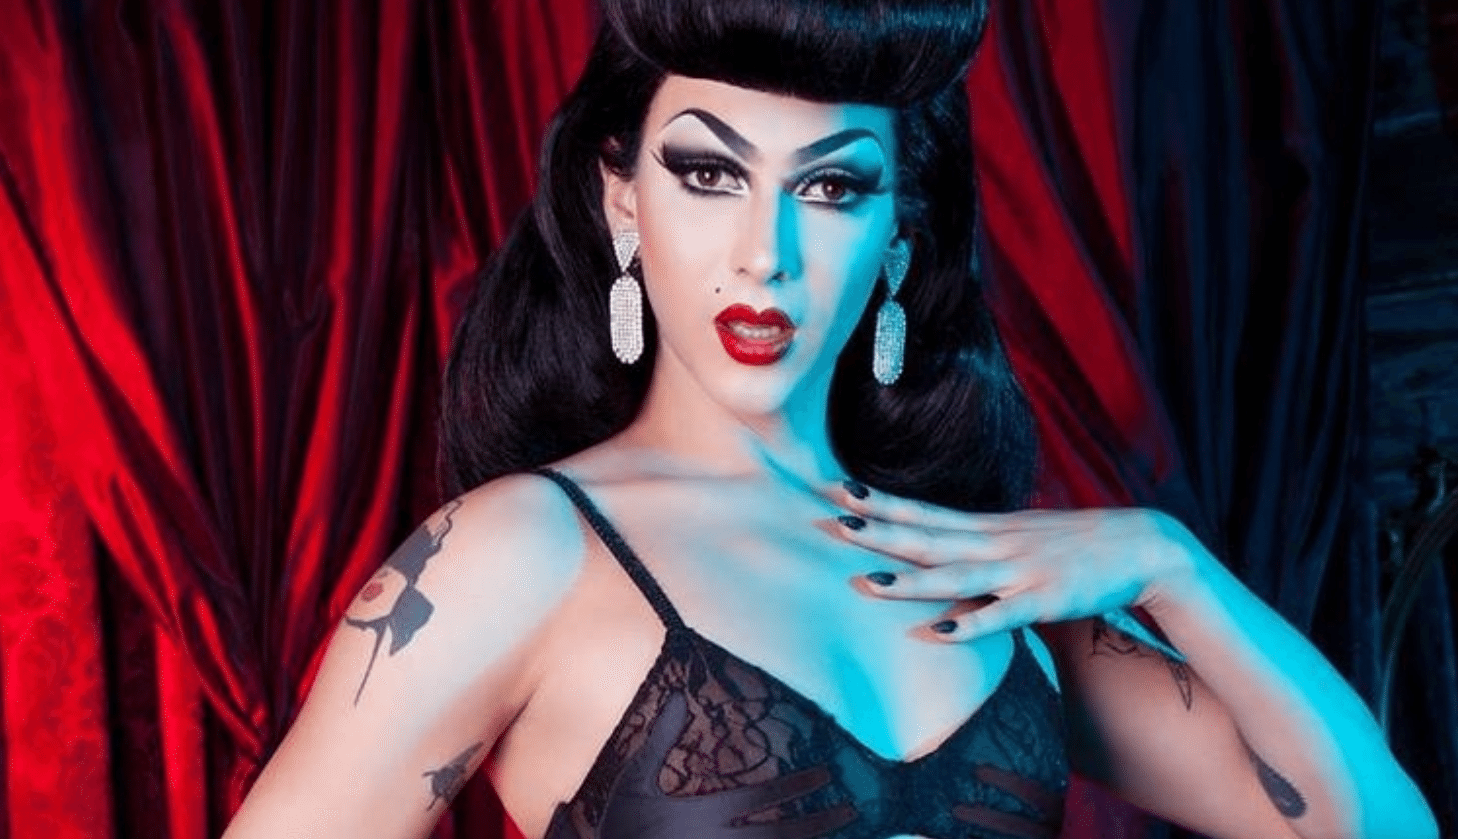 Drag star Violet Chachki is the face of new lingerie line